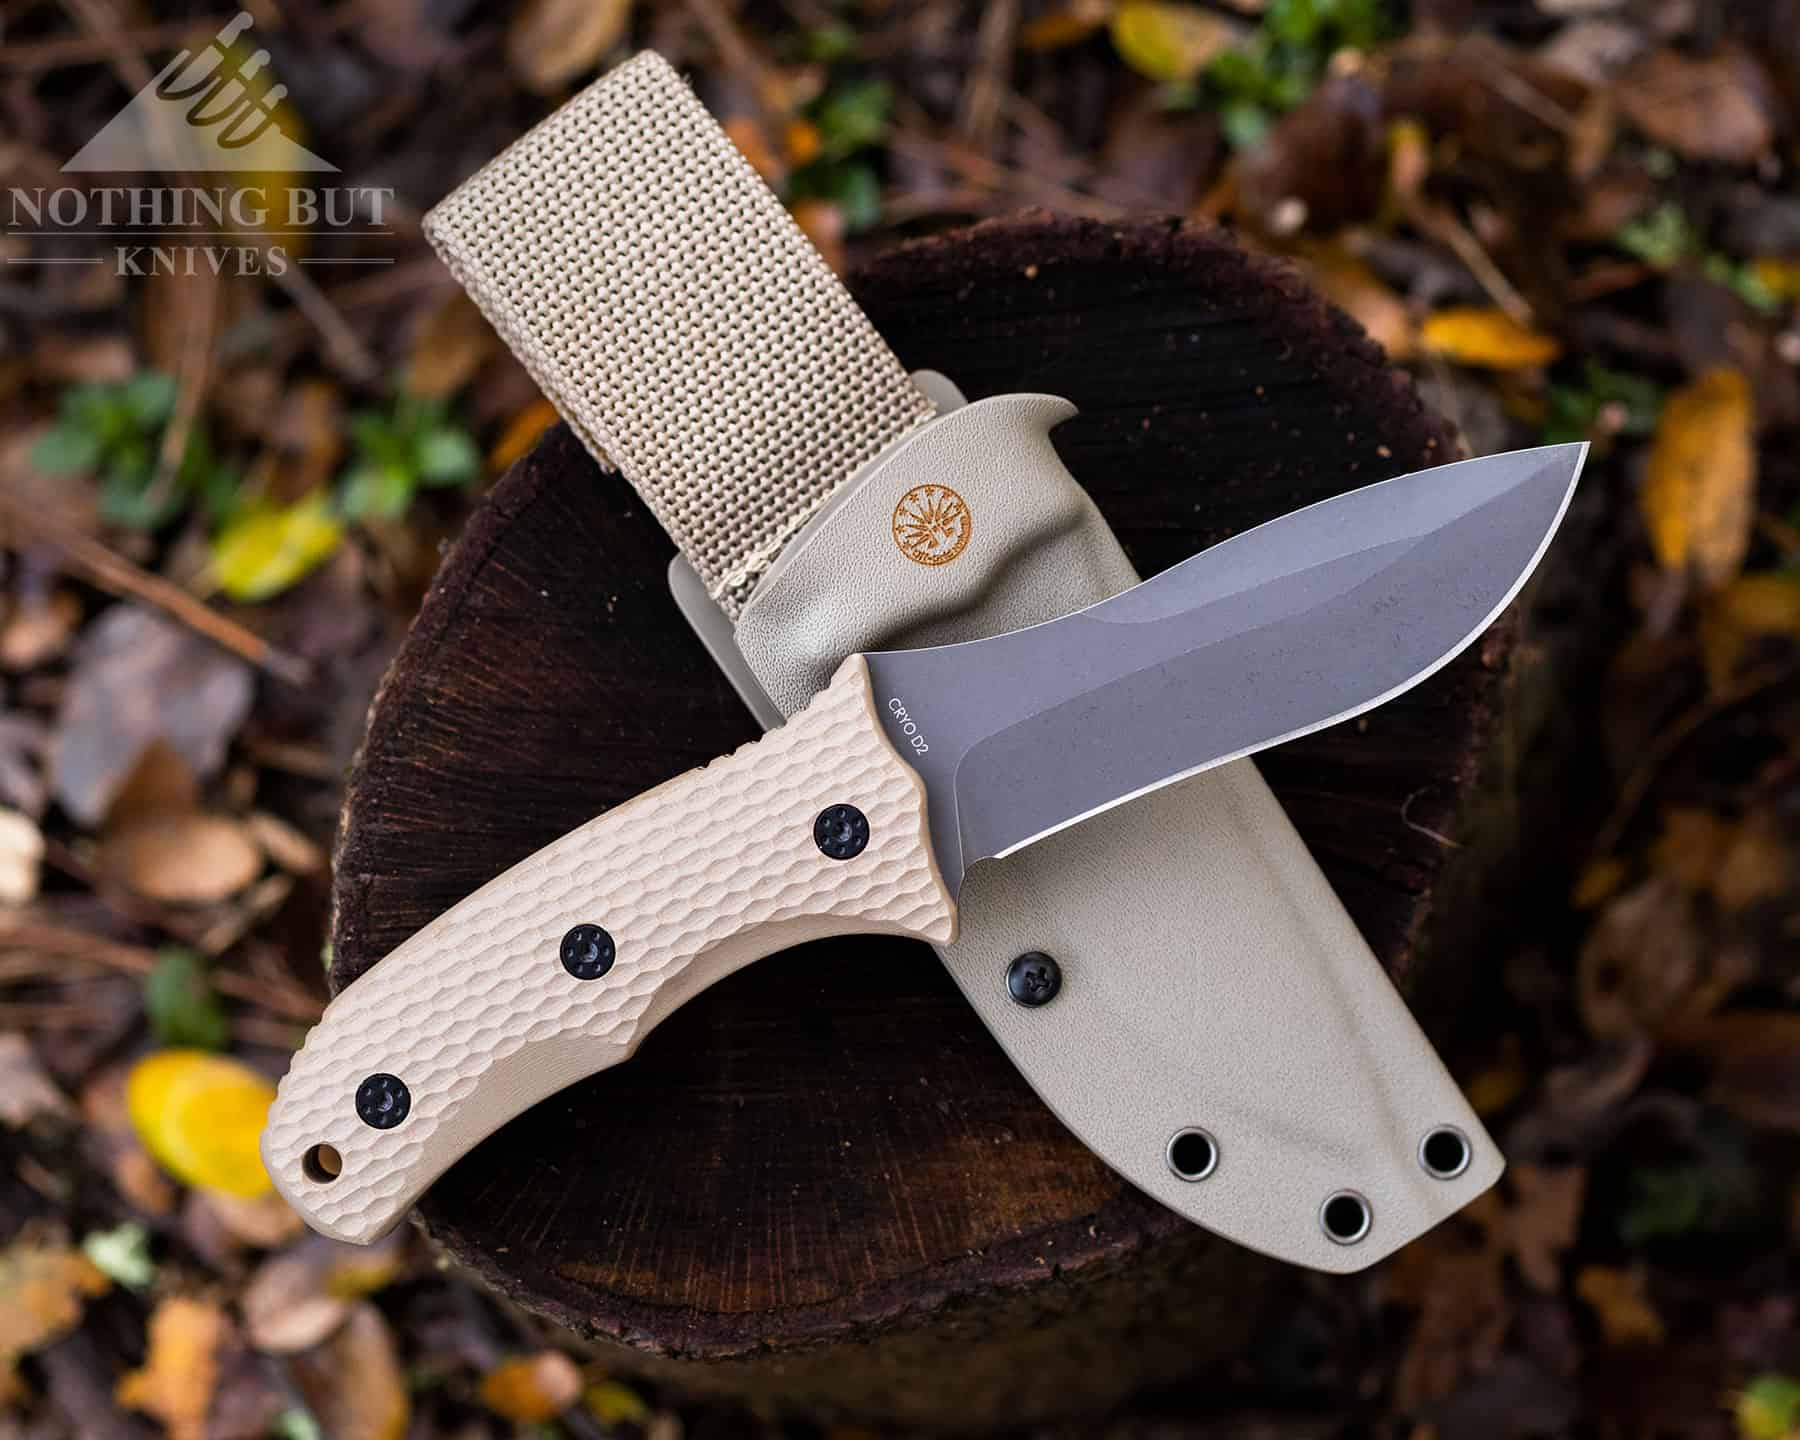 The Off-Grid Backcountry V2 ships with an innovative sheath that makes it a great option for hunting and backpacking trips. 